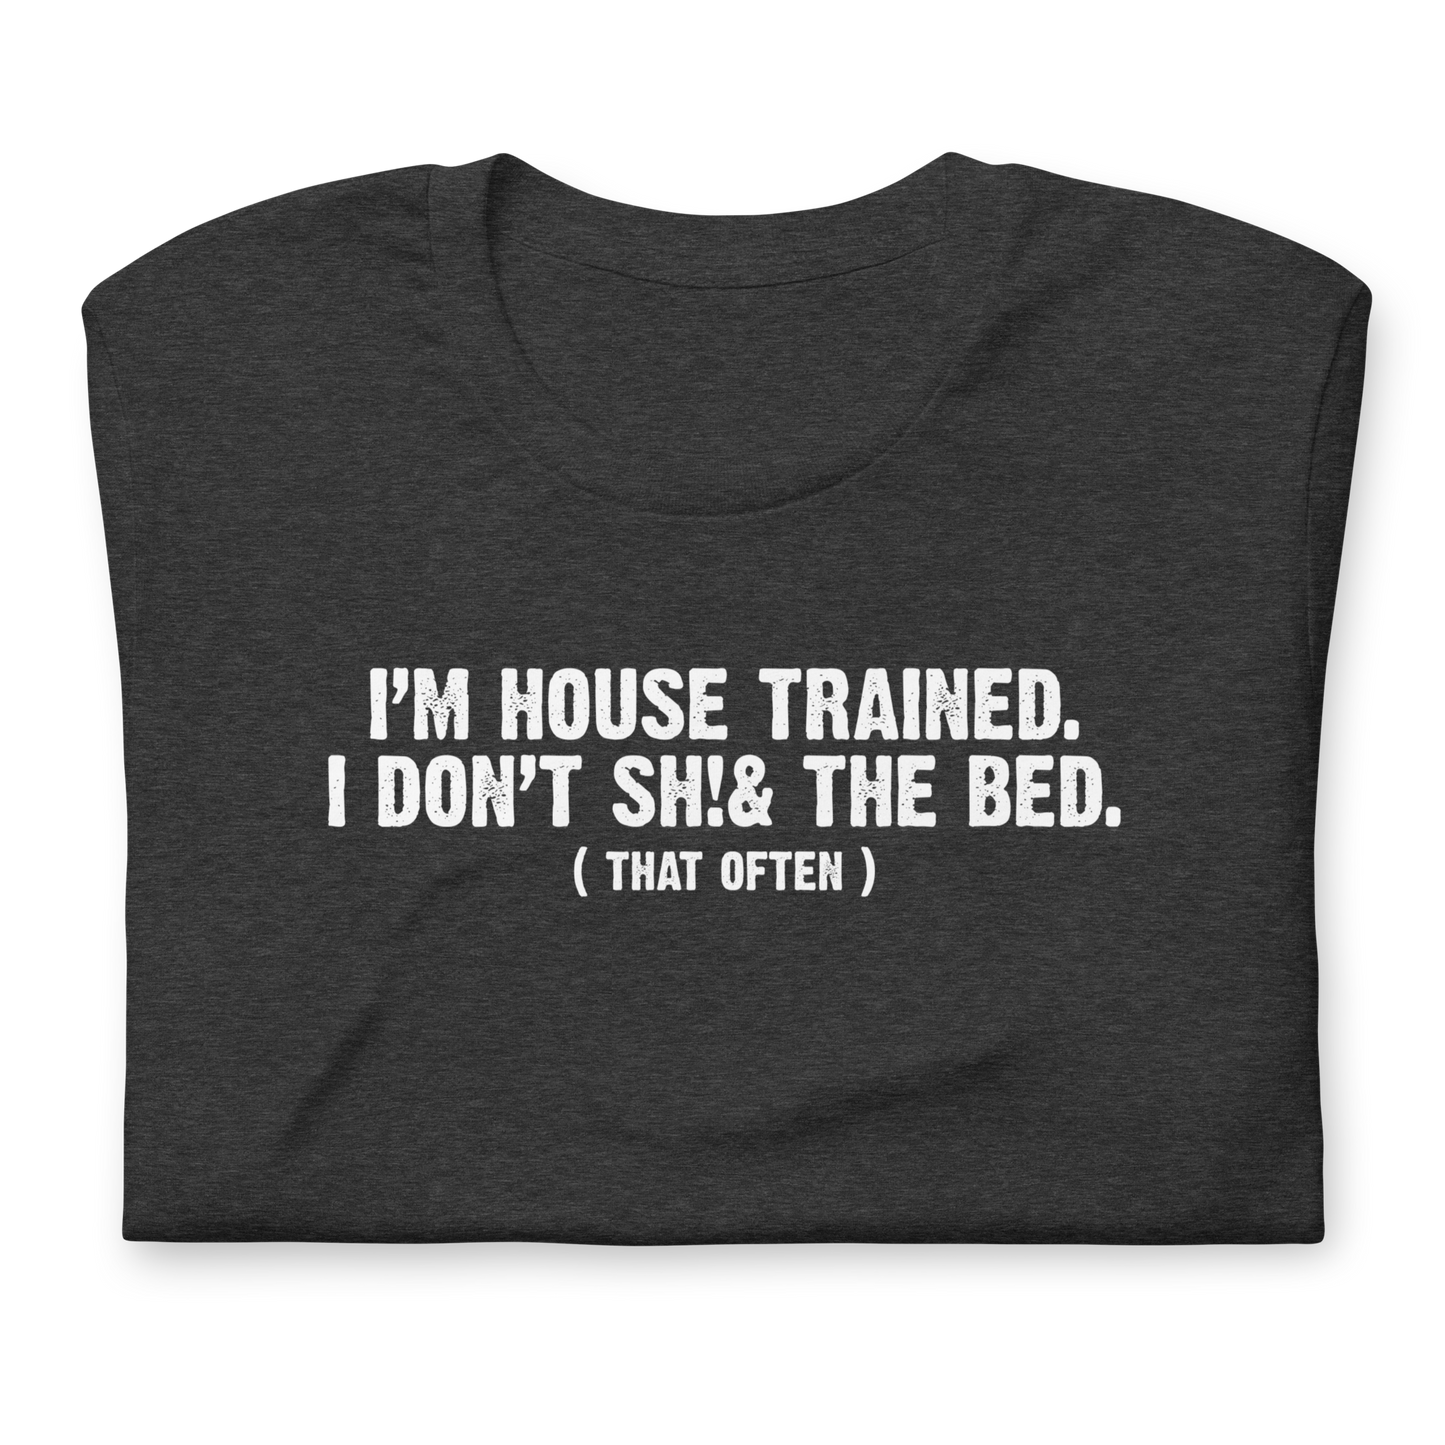 Unisex - I'm House Trained. I Don't Sh!& the bed. ( that often ) - Funny T-shirt